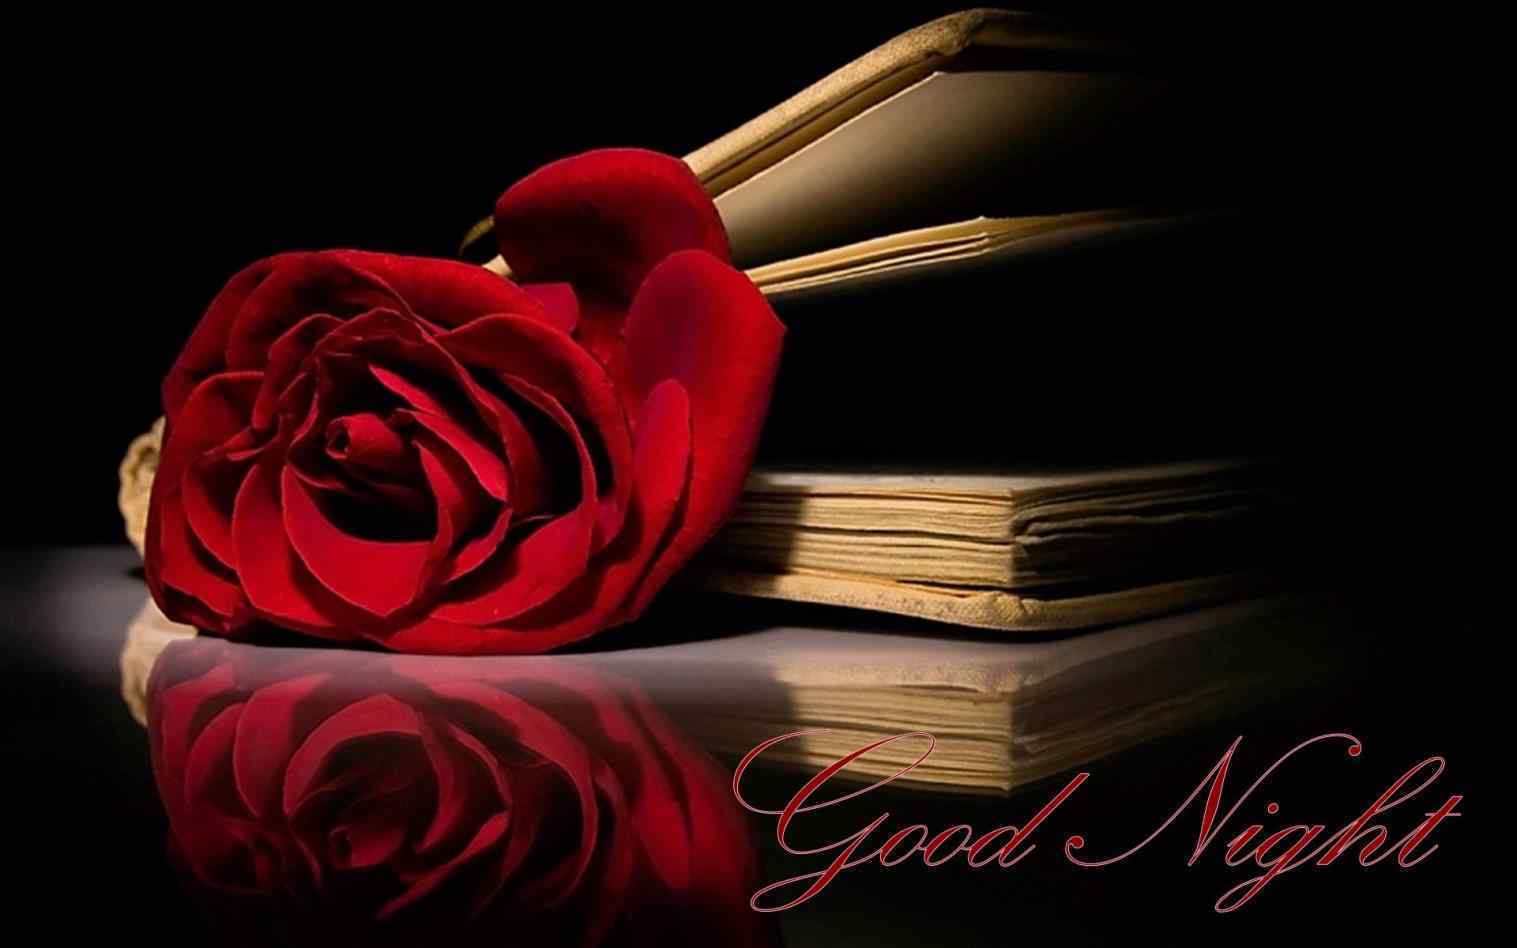 good night images with red roses